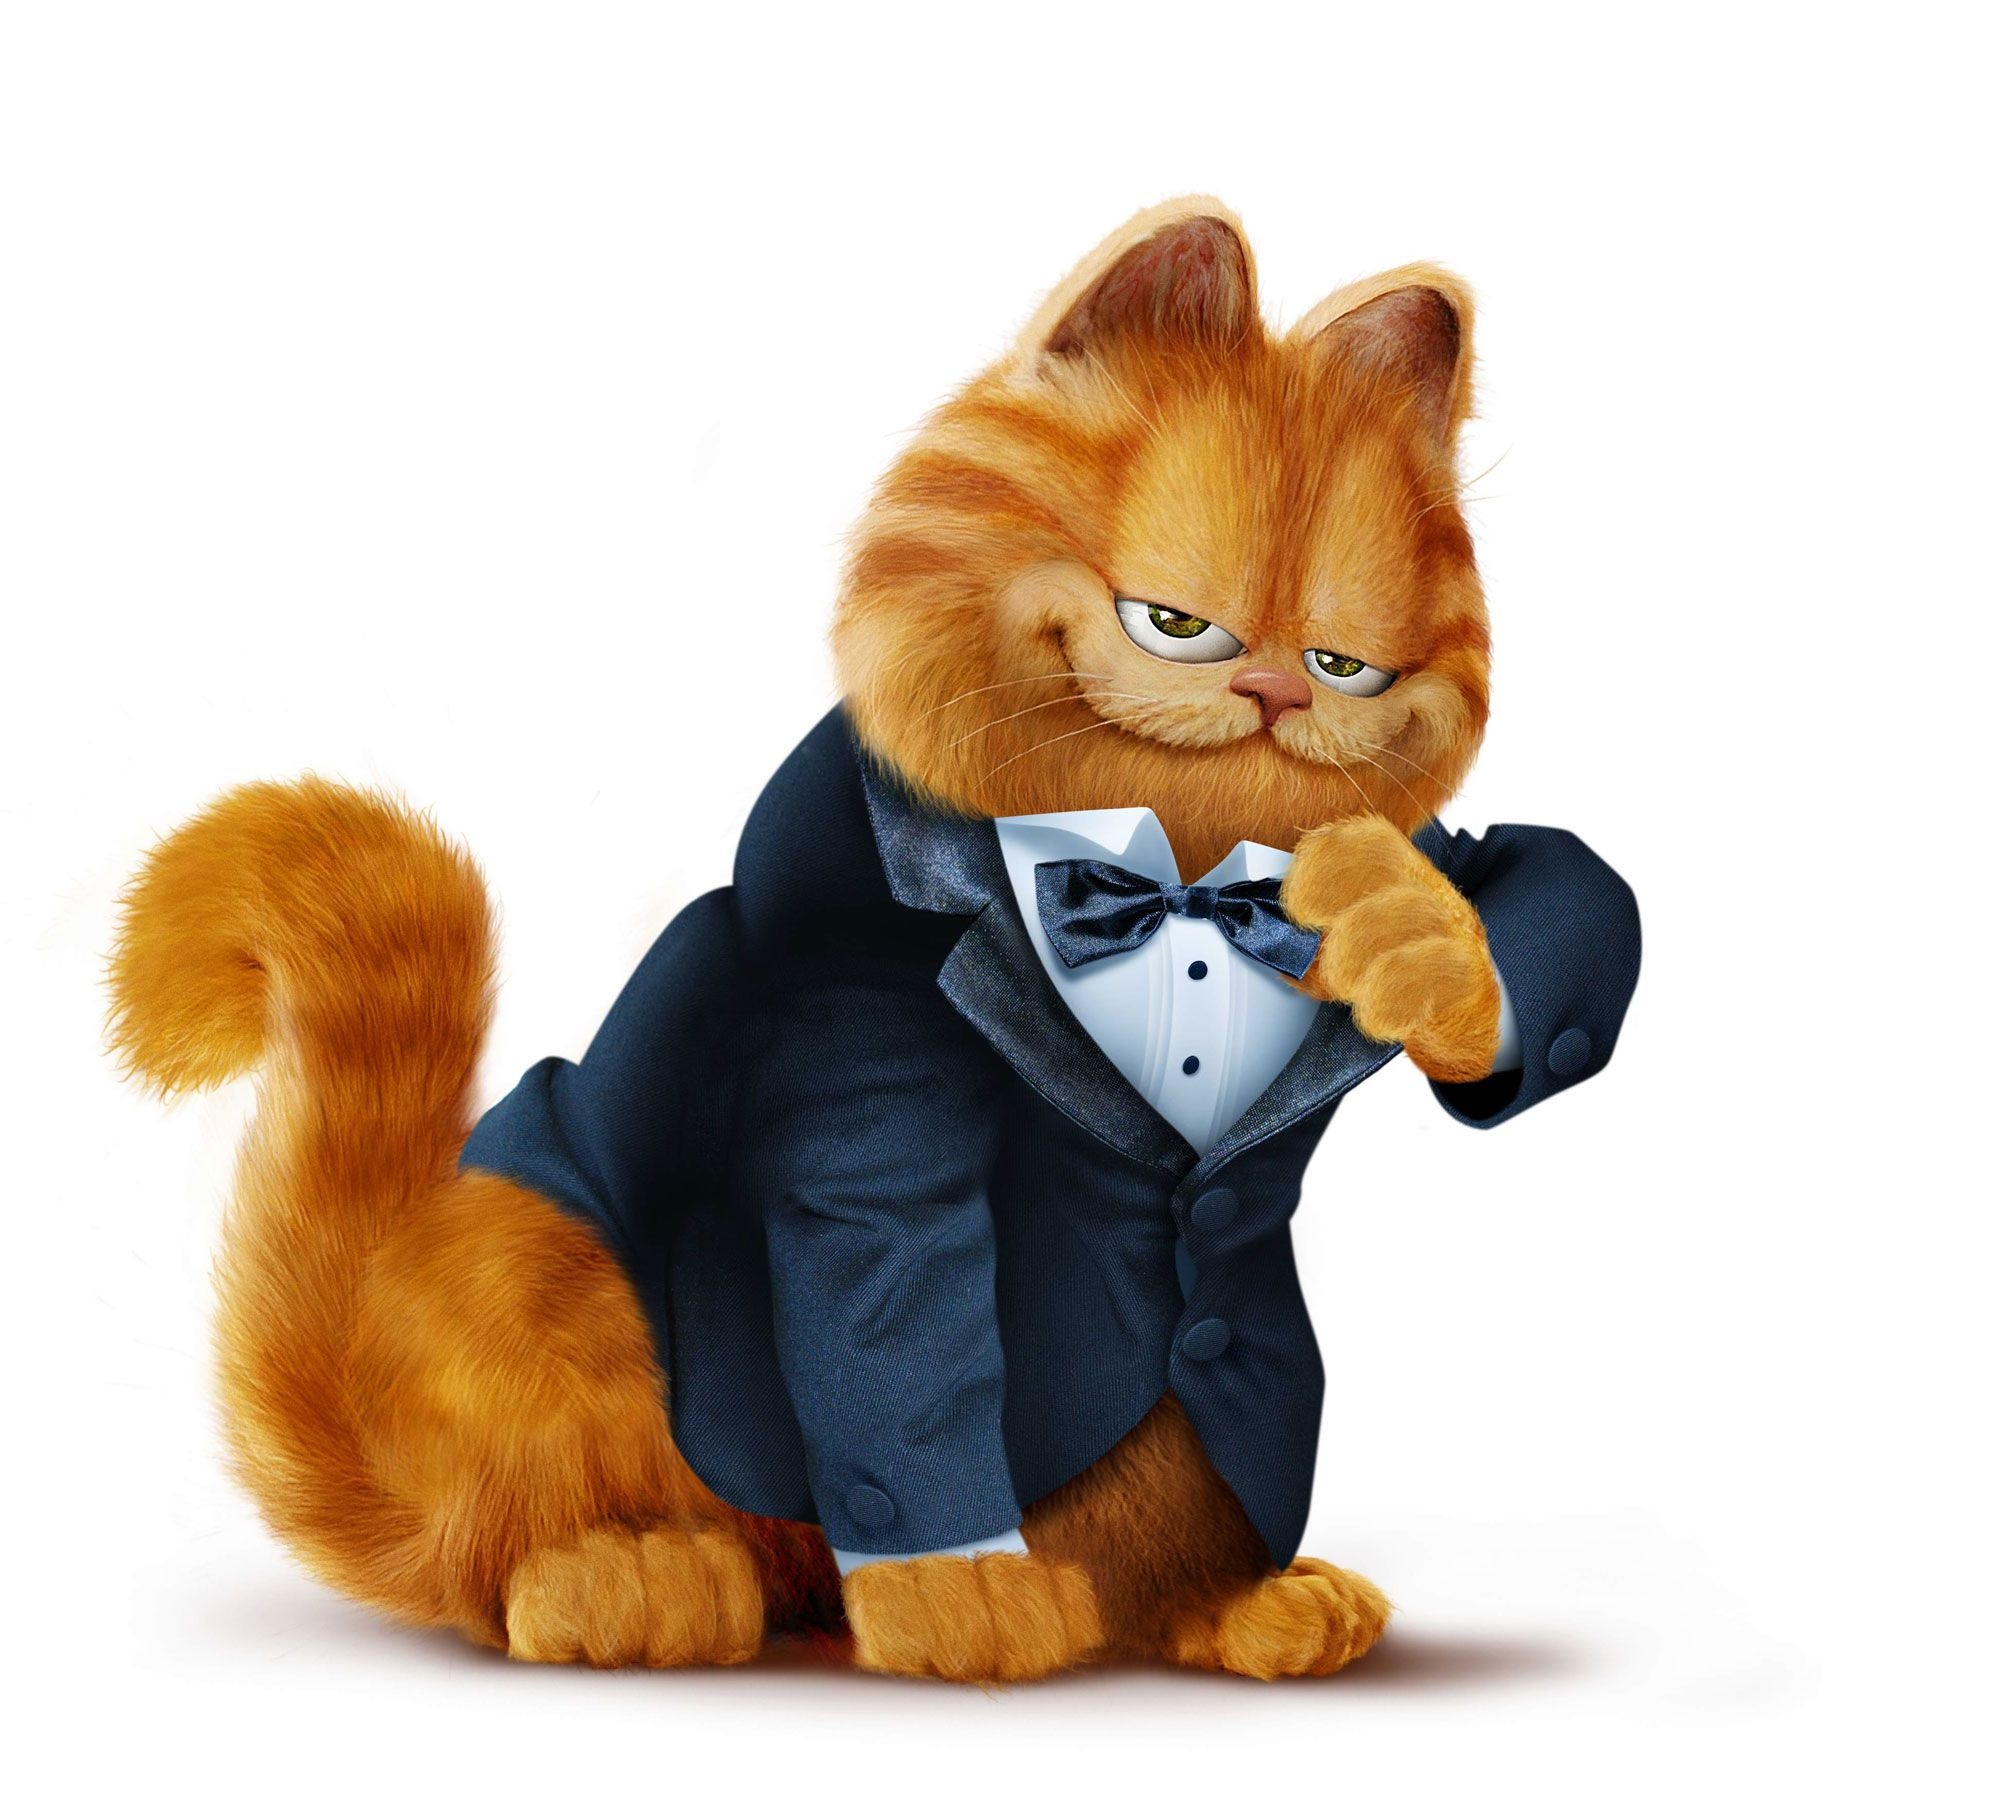 Garfield: A cat, created by Jim Davis, Fictional character. 2000x1820 HD Background.